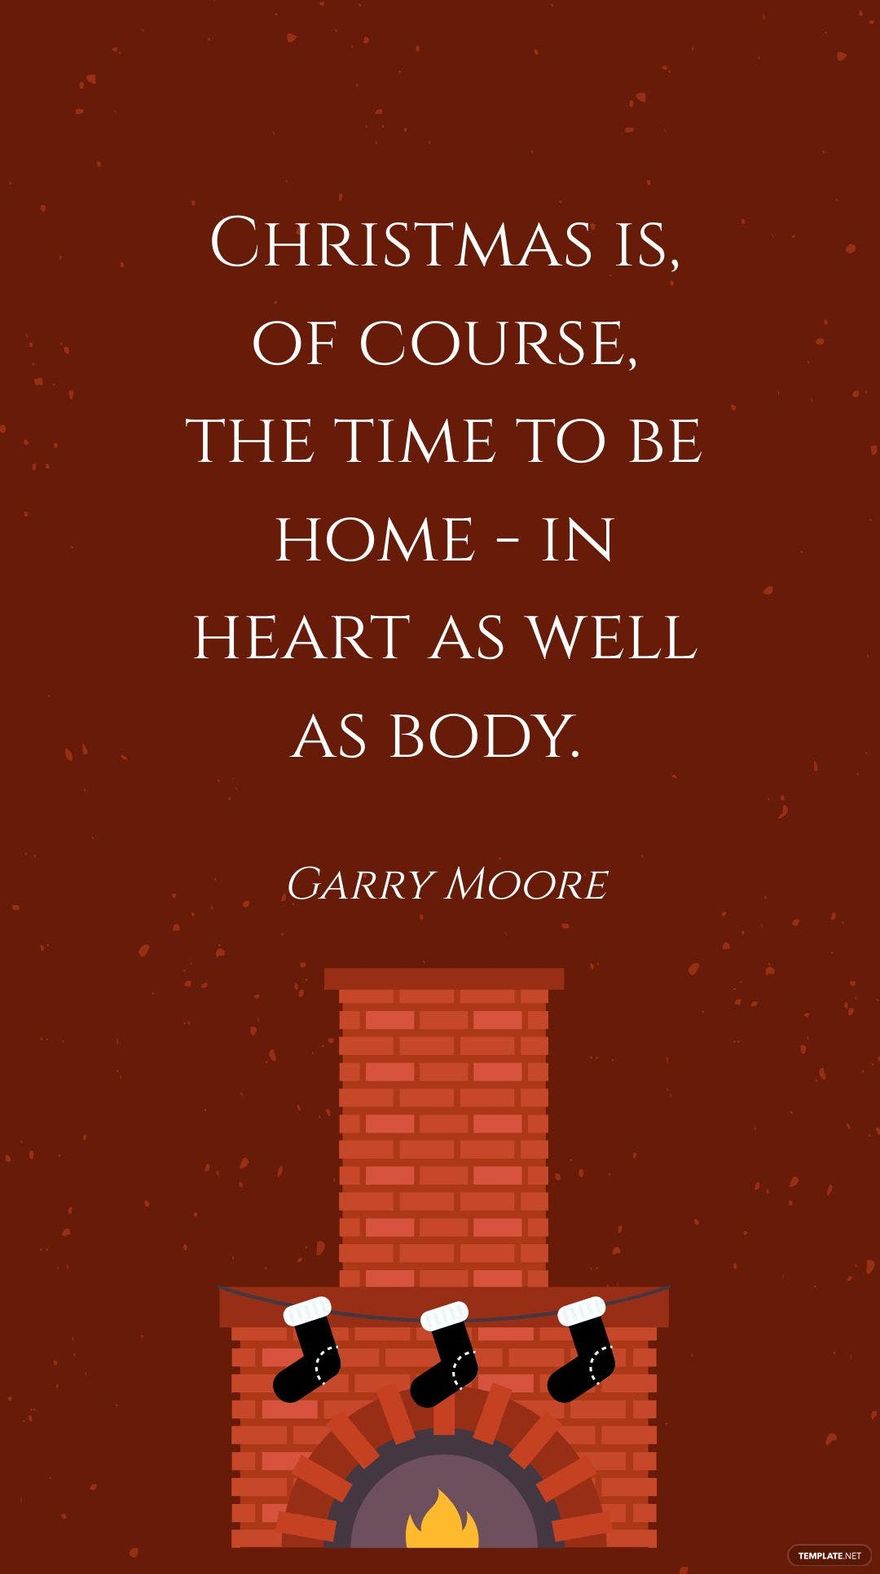 Garry Moore - Christmas is, of course, the time to be home - in heart as well as body.